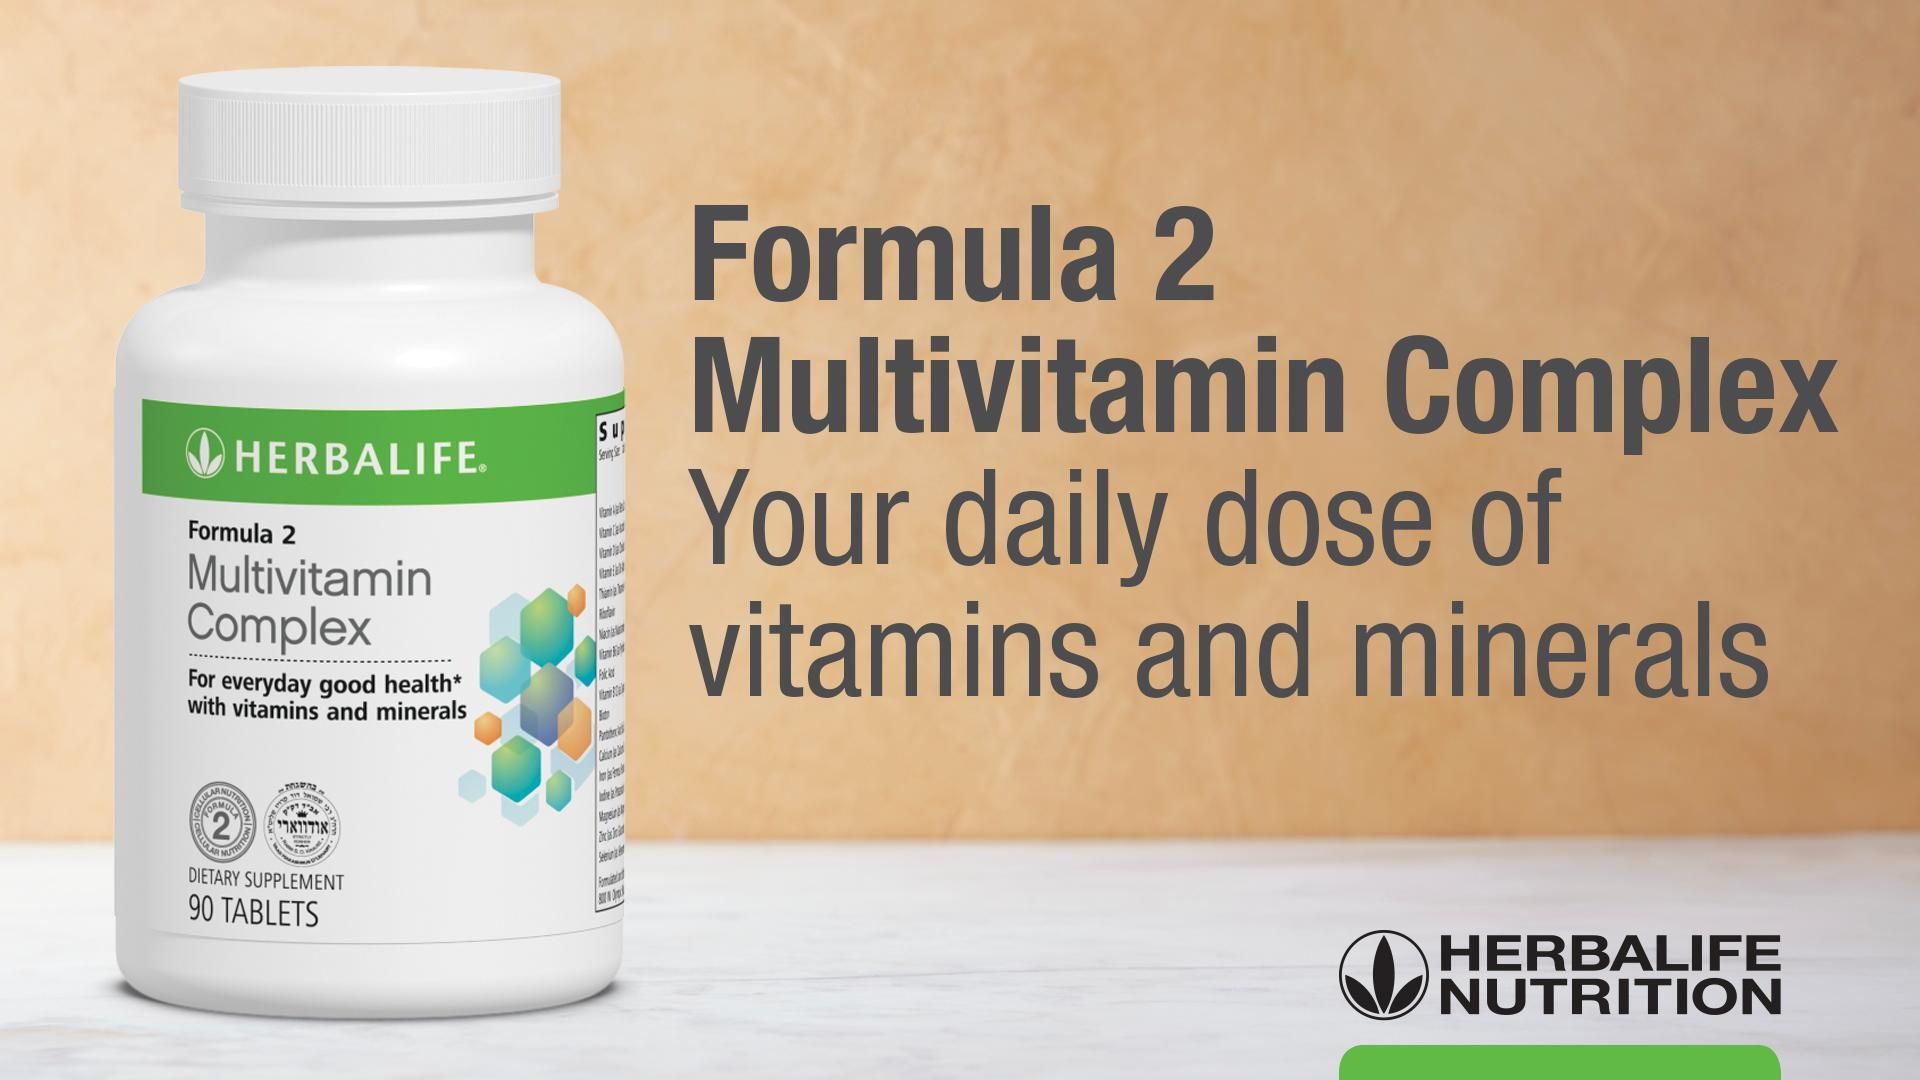 Formula 2 Multivitamin Complex: Know the Products